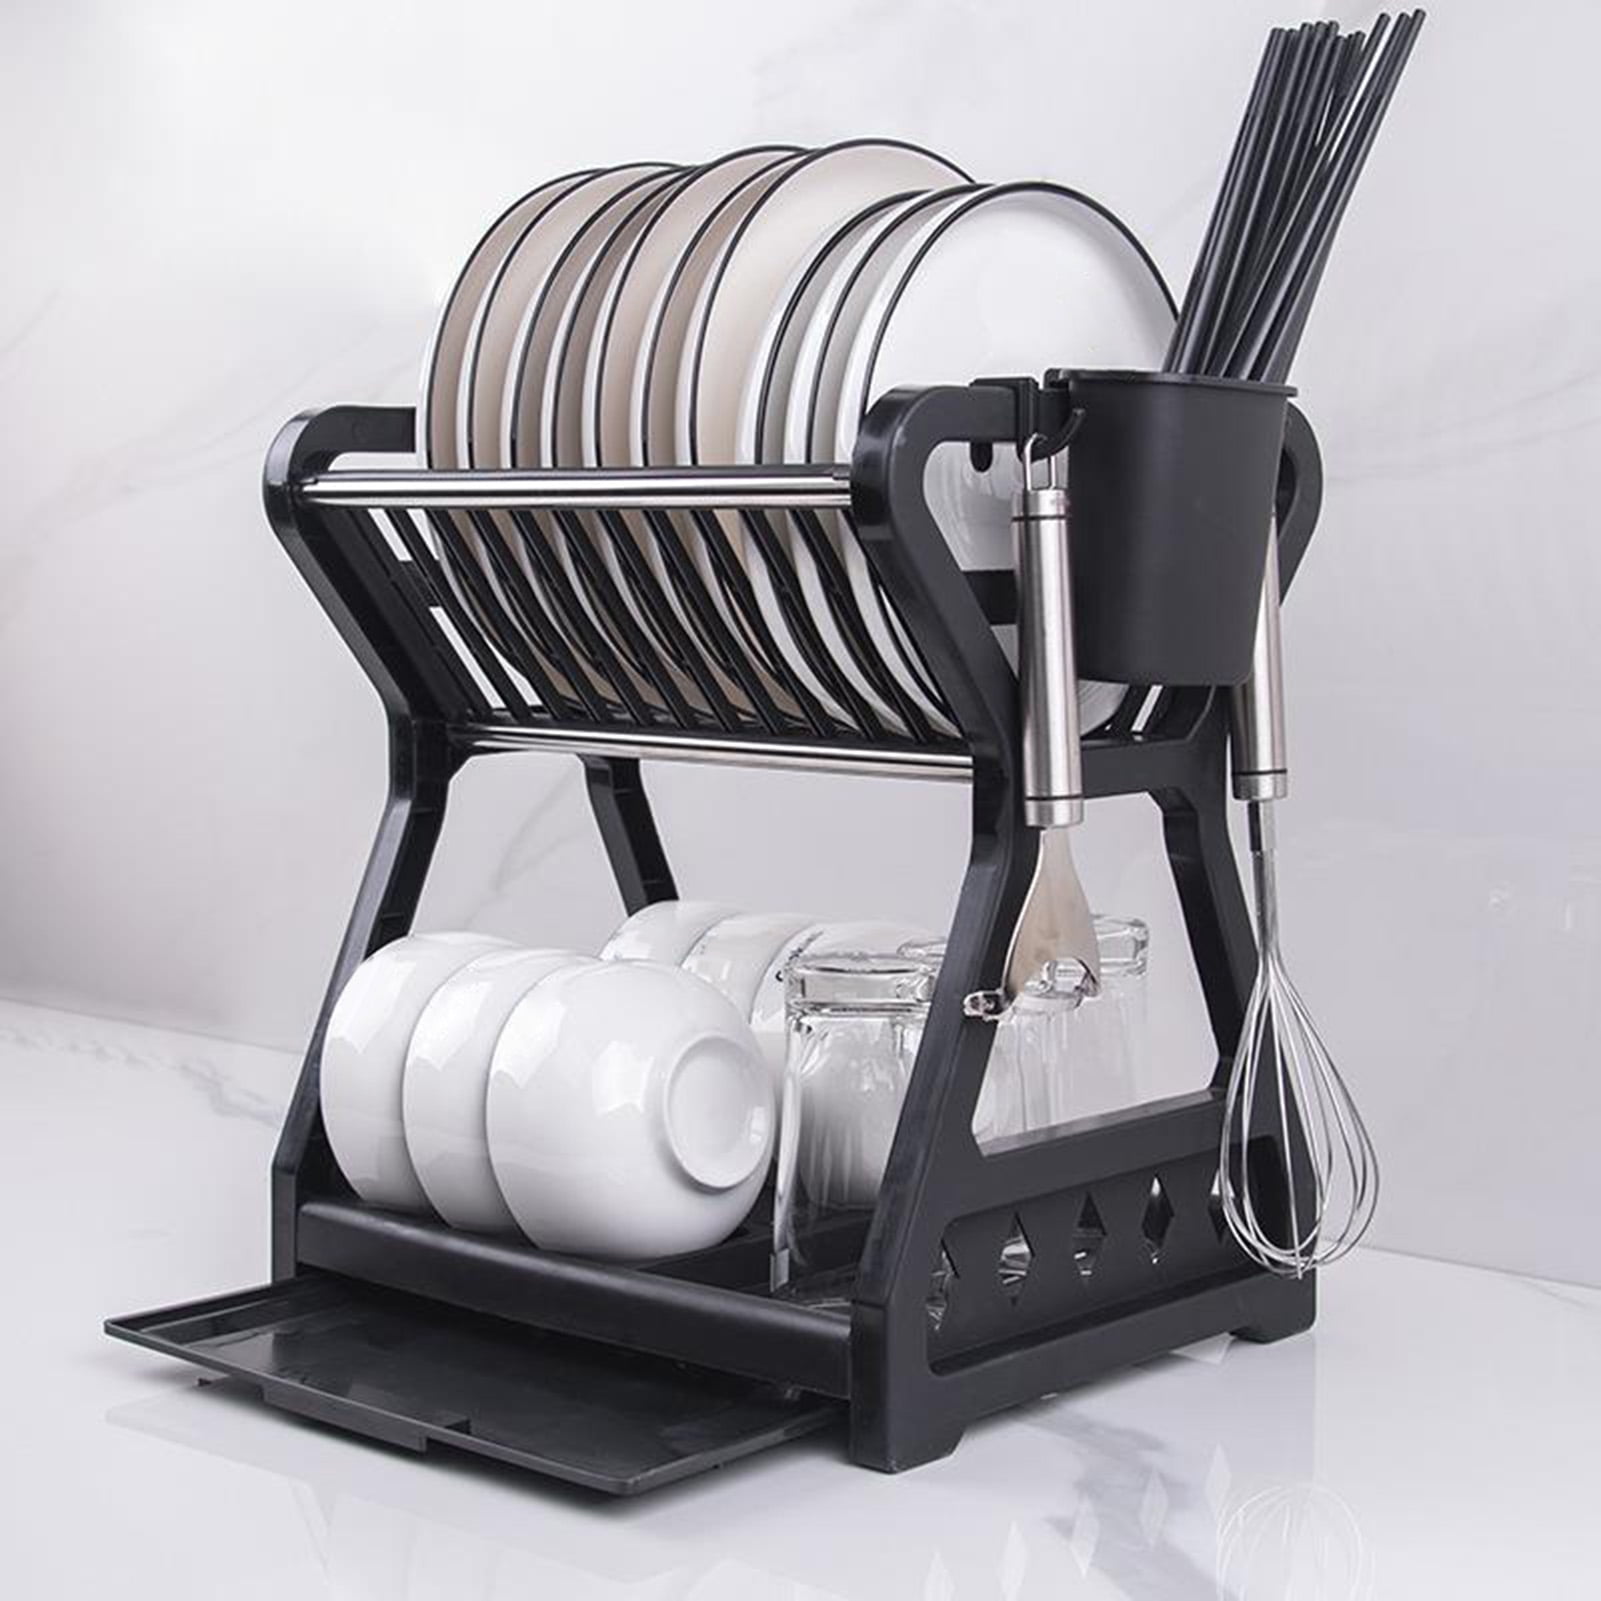 Virgorack 3 Tier Large Wall Mounted Dish Drainer